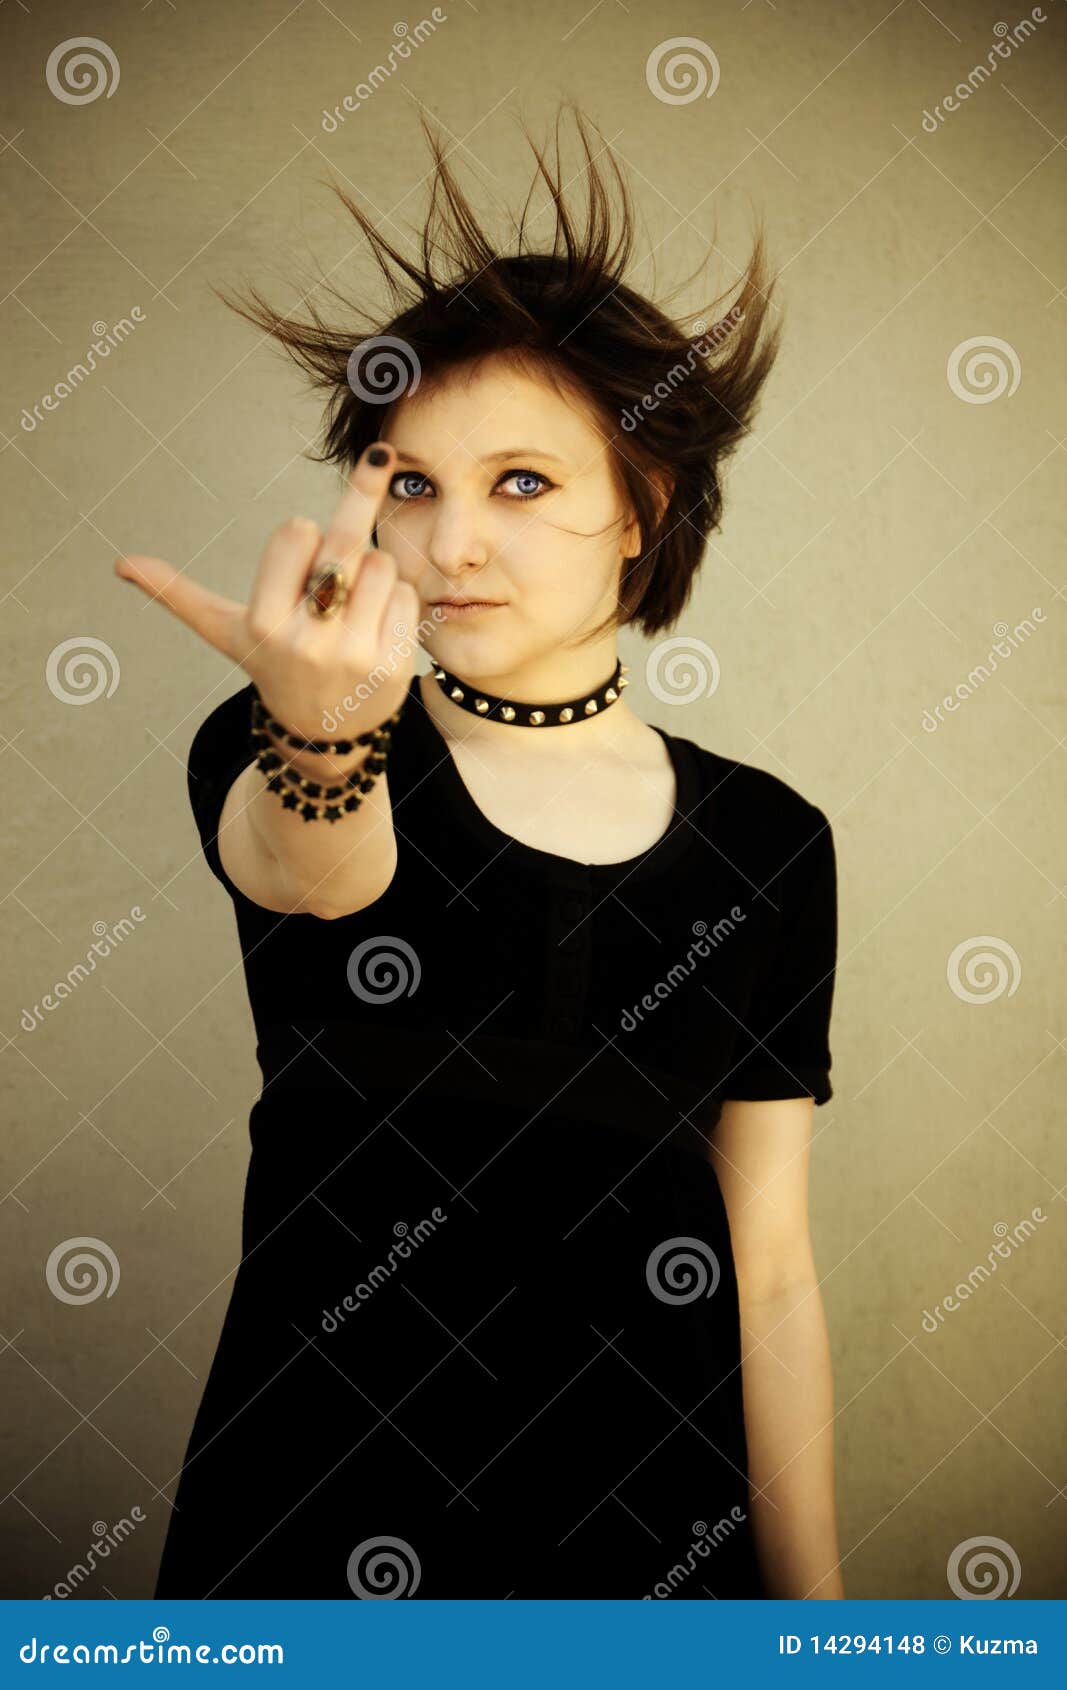 Angry Emo Royalty Free Stock Photos - Image: 14294148